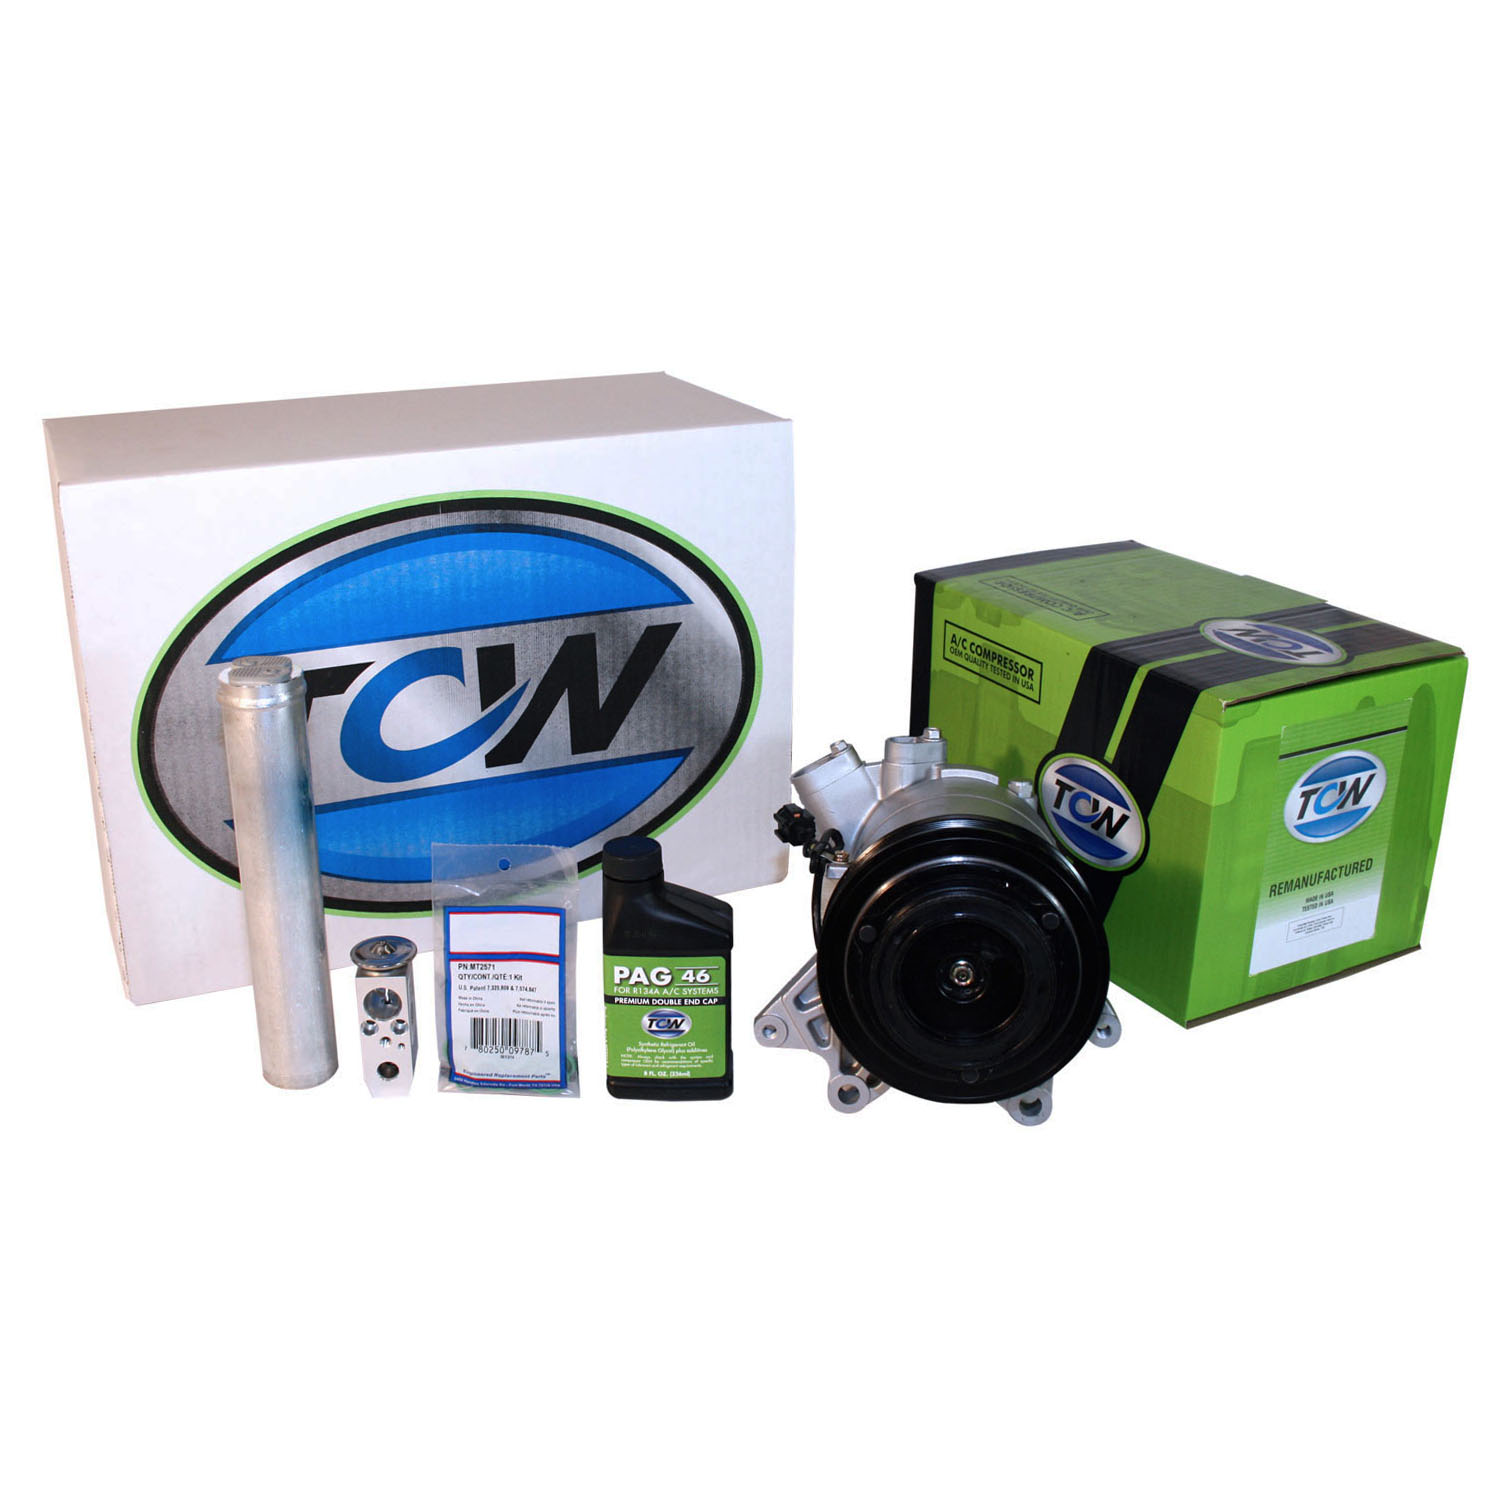 TCW Vehicle A/C Kit K1000344R Remanufactured